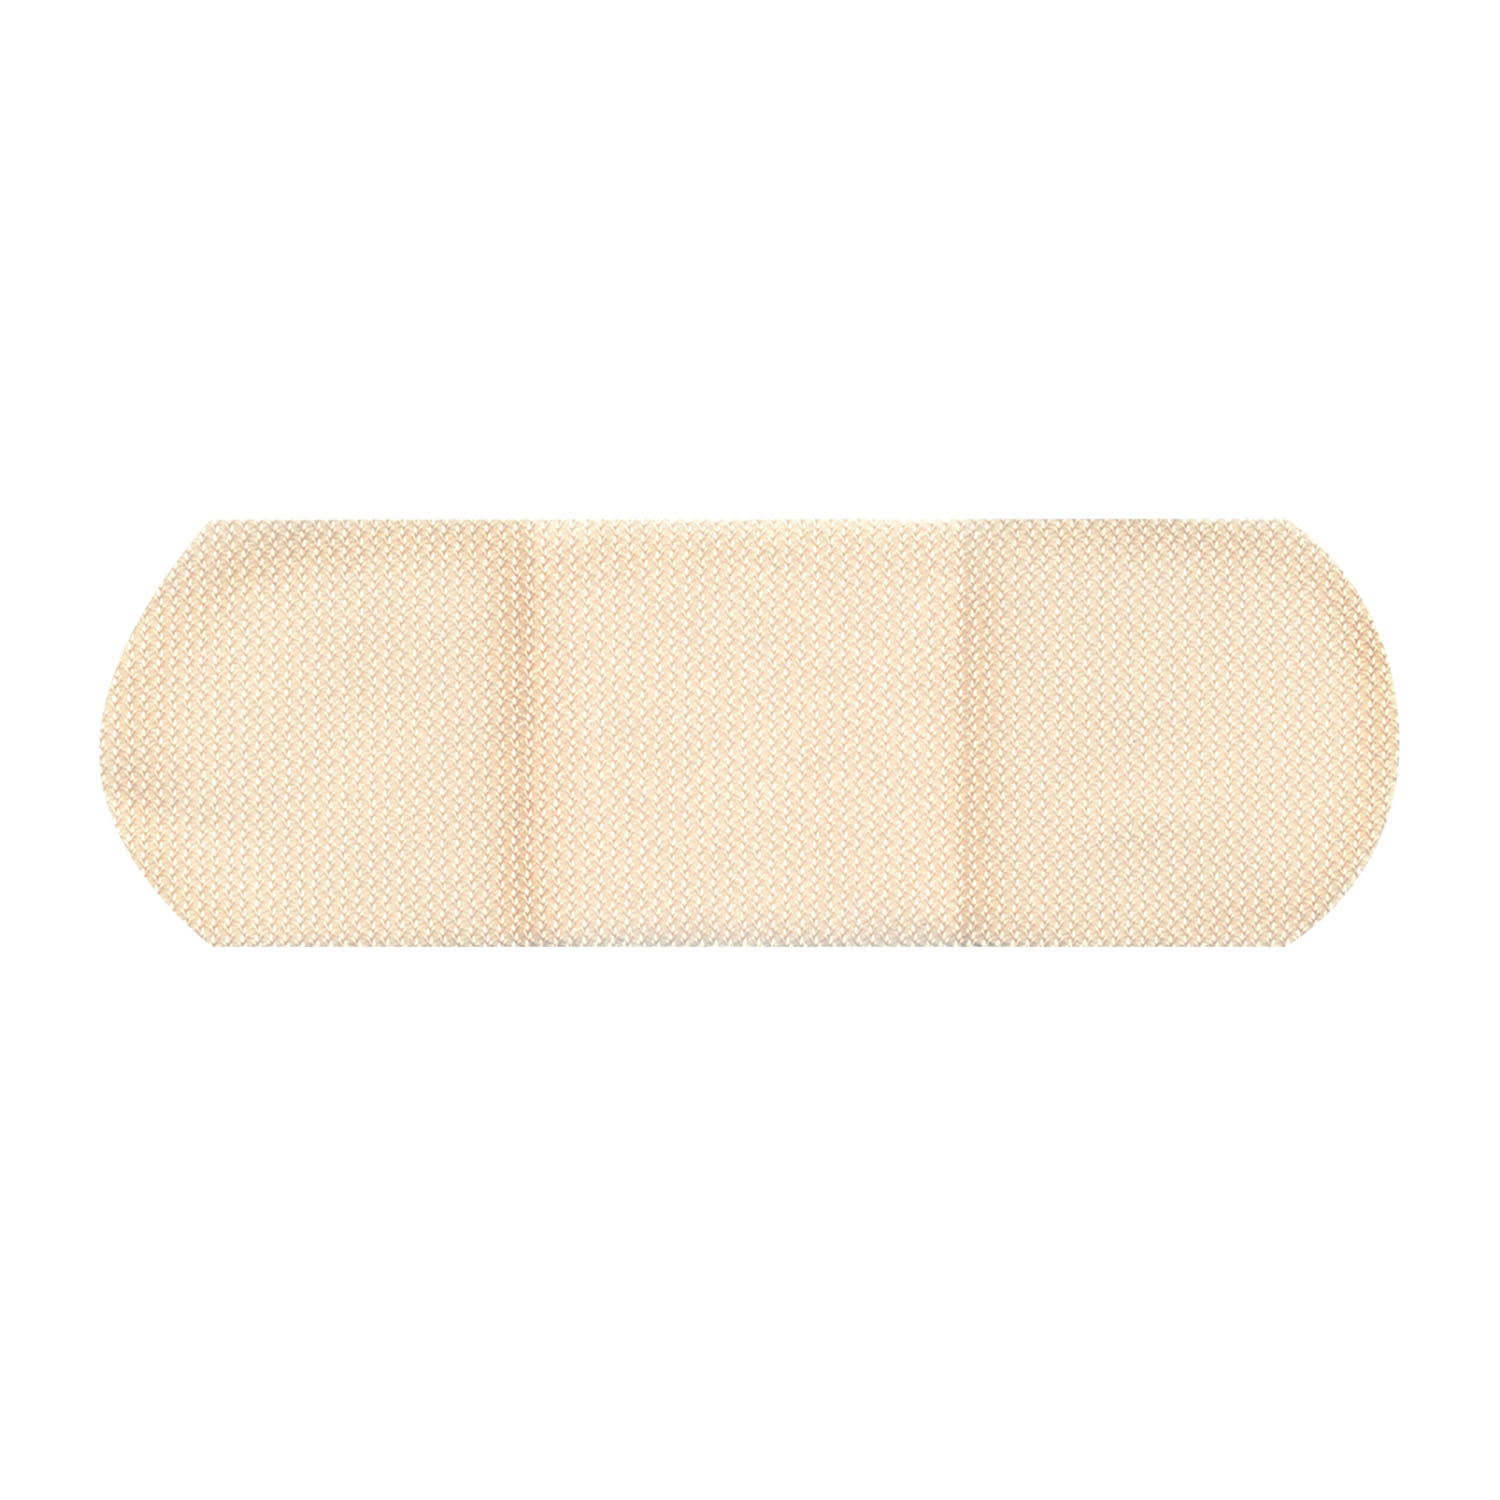 DUKAL FIRST AID® ADHESIVE BANDAGES : 1790033 BX